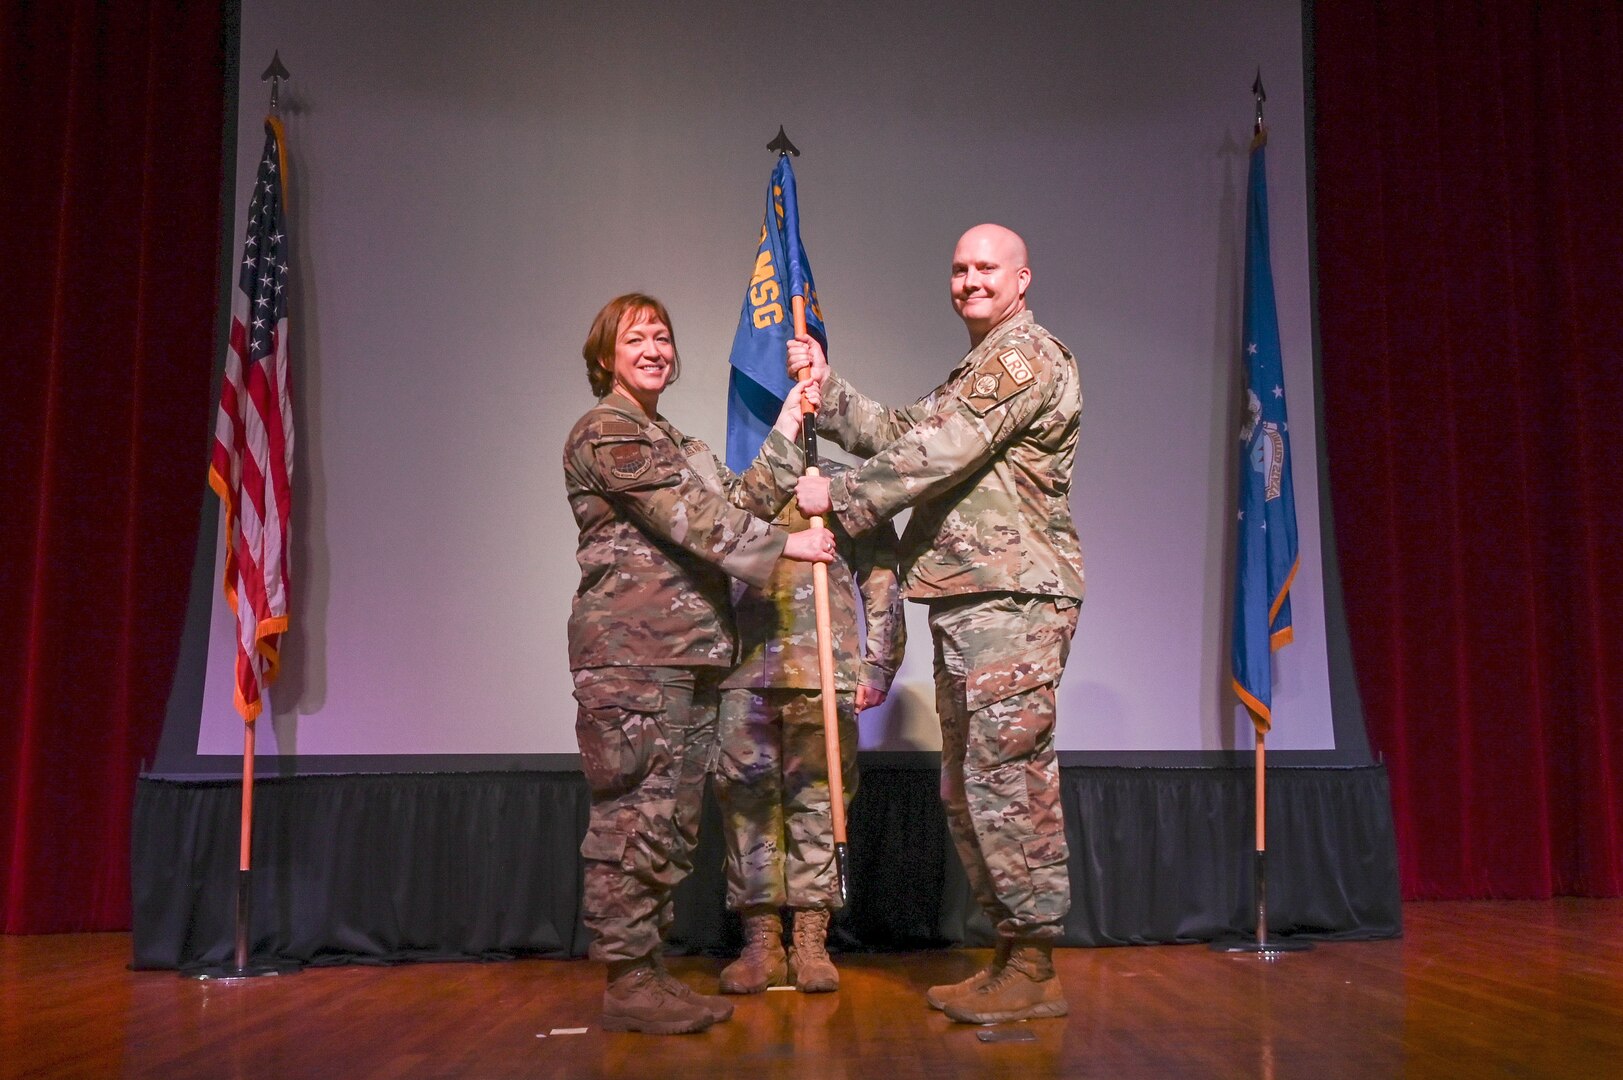 Col. Jeanne Bisesi, 433rd Mission Support Group commander, presents the 433rd Logistic Readiness Squadron guidon to Maj. Jeffrey Barney during an assumption of command ceremony at Joint Base San Antonio-Lackland, Texas, July 9, 2023. The 433rd LRS's mission is to provide the logistical support necessary for the Alamo Wing to complete its assigned missions. (U.S. Air Force photo by Staff Sgt. Adriana Barrientos)